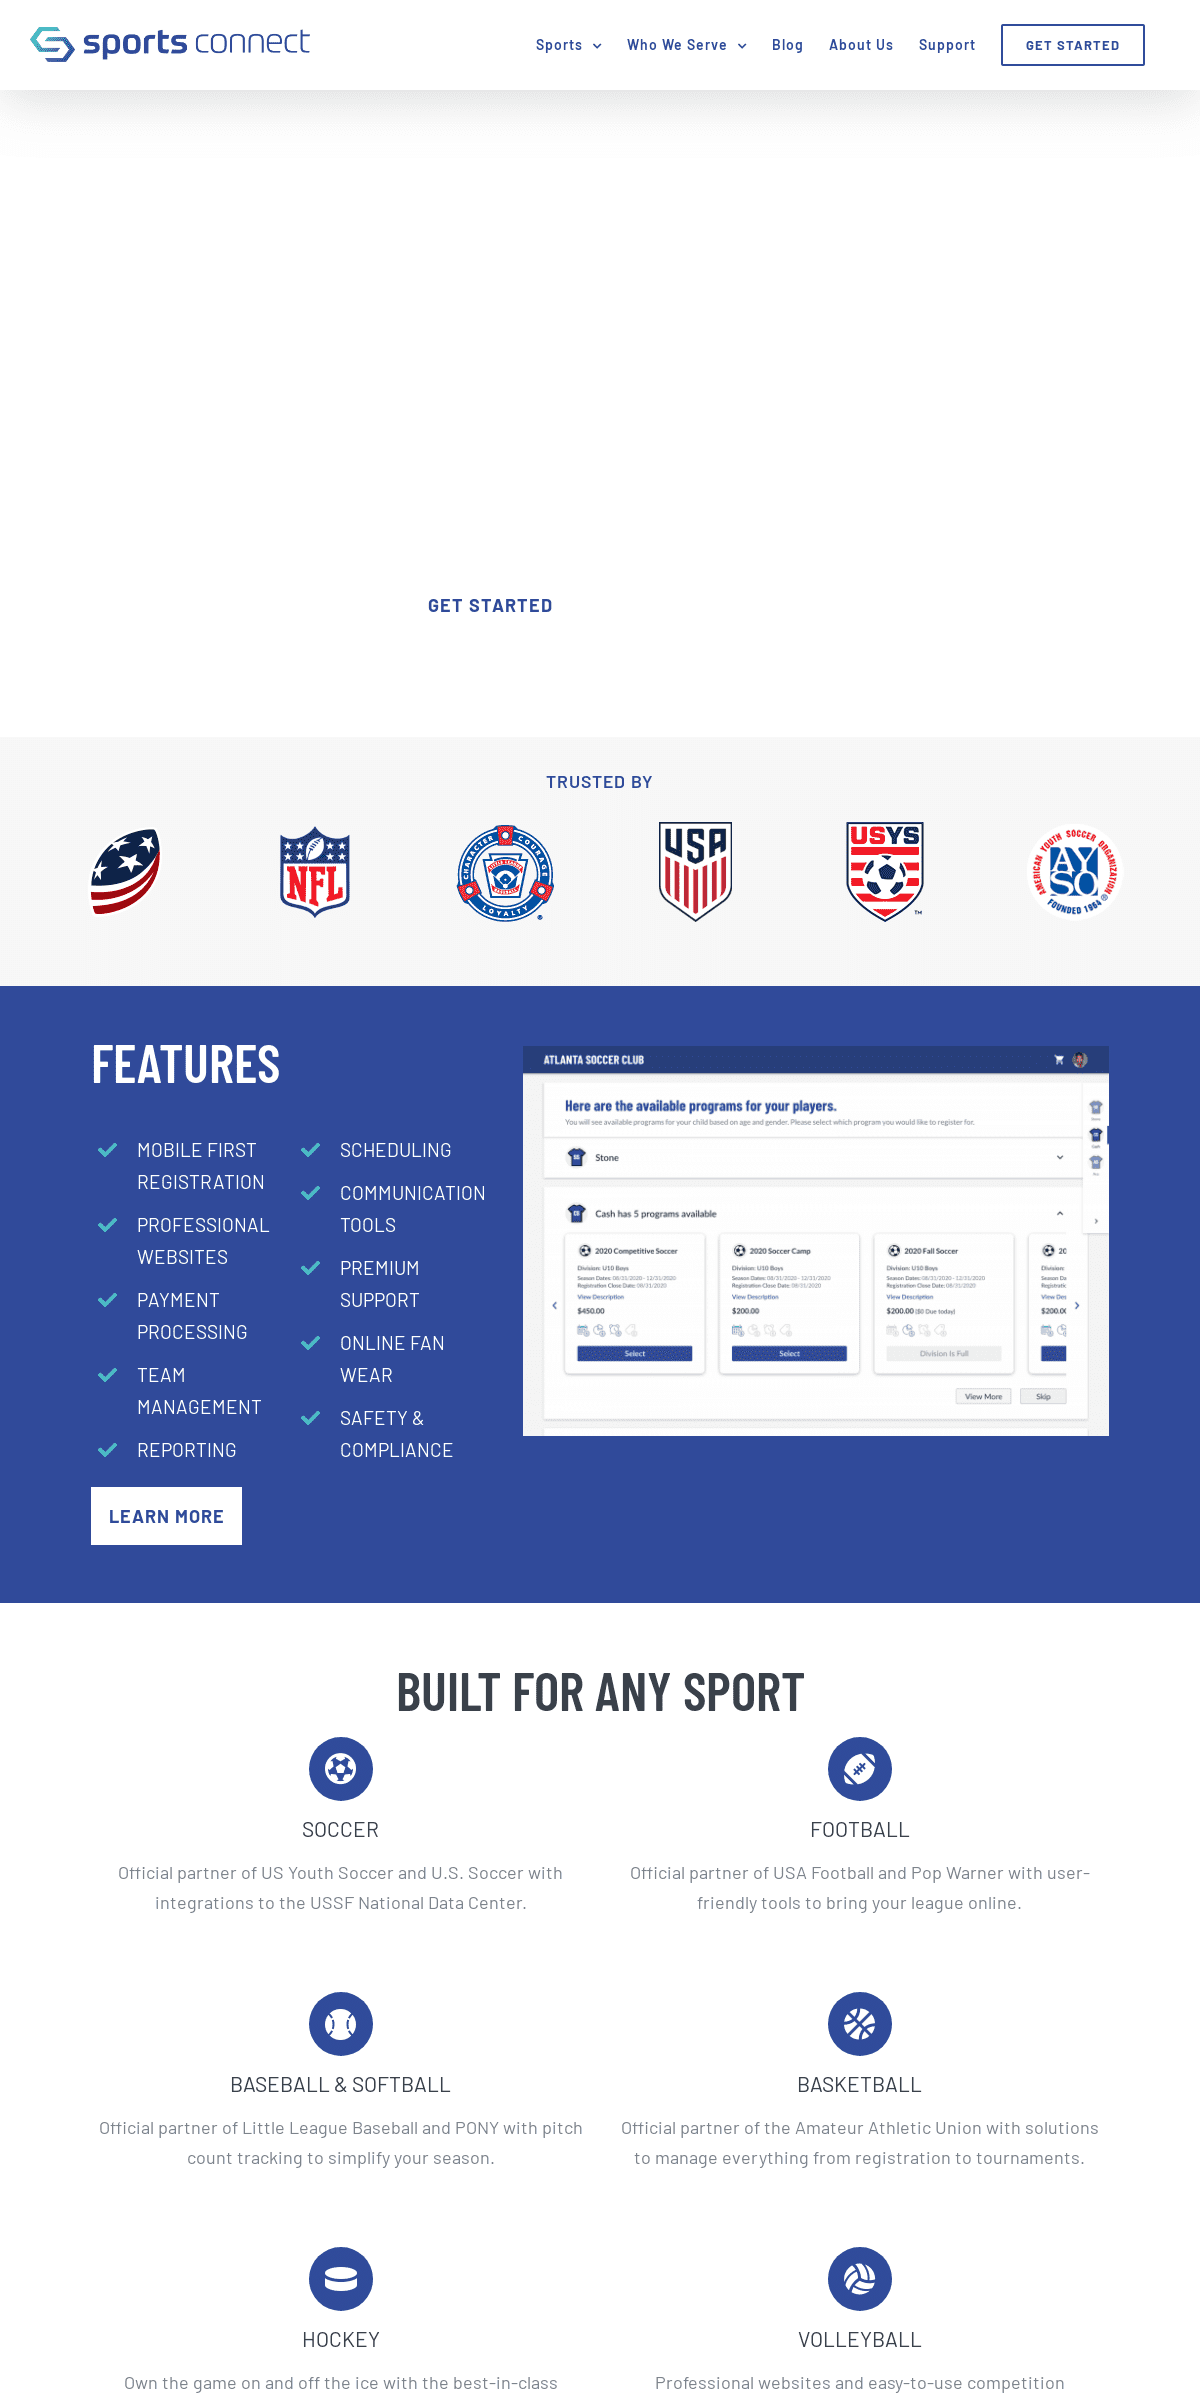 A complete backup of sportsconnect.com